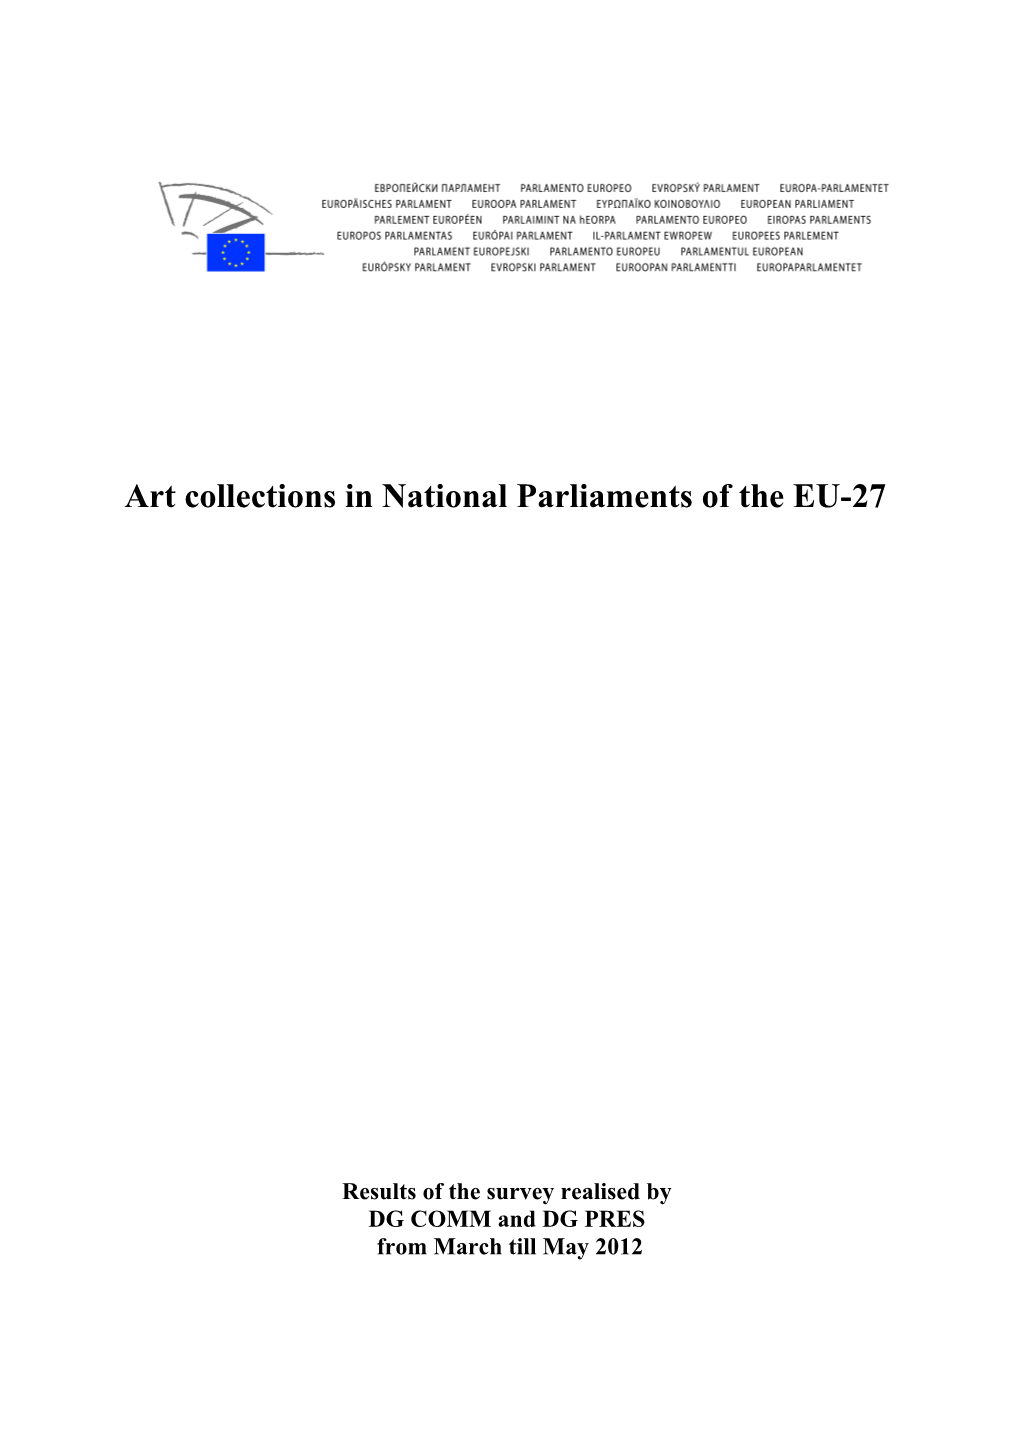 Art Collections in National Parliaments of the EU-27